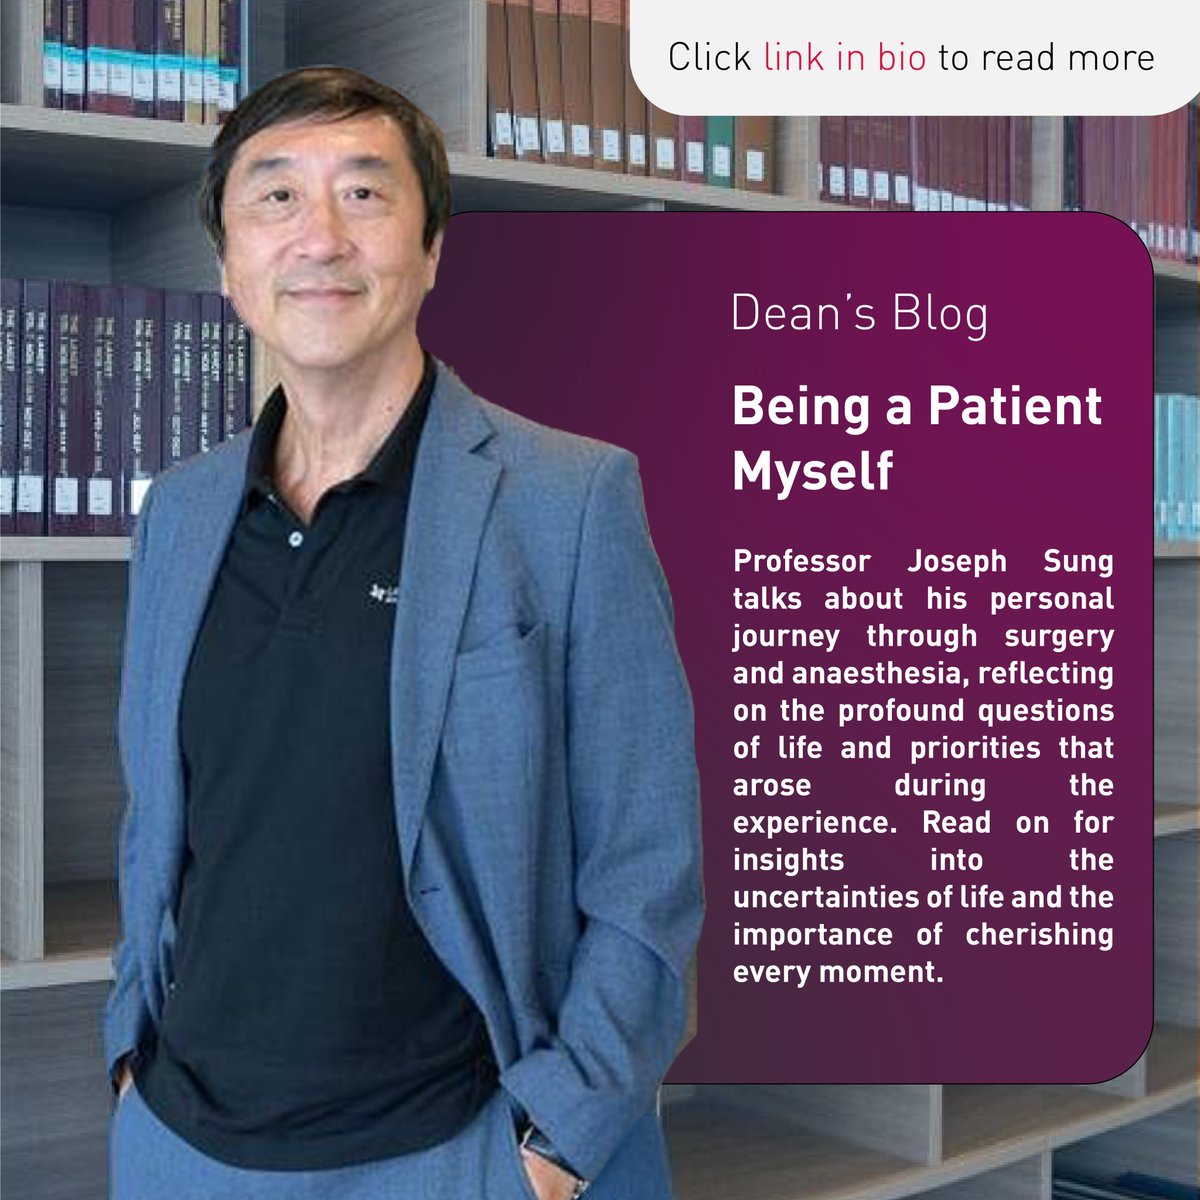 Reflecting on a profound journey: Prof Joseph Sung's first surgery under anesthesia last year led to intimate insights on health and life's uncertainties. Read more: ntu.edu.sg/medicine/news-… #LKCMedicine #HealthJourney #LifeReflections #Gratitude